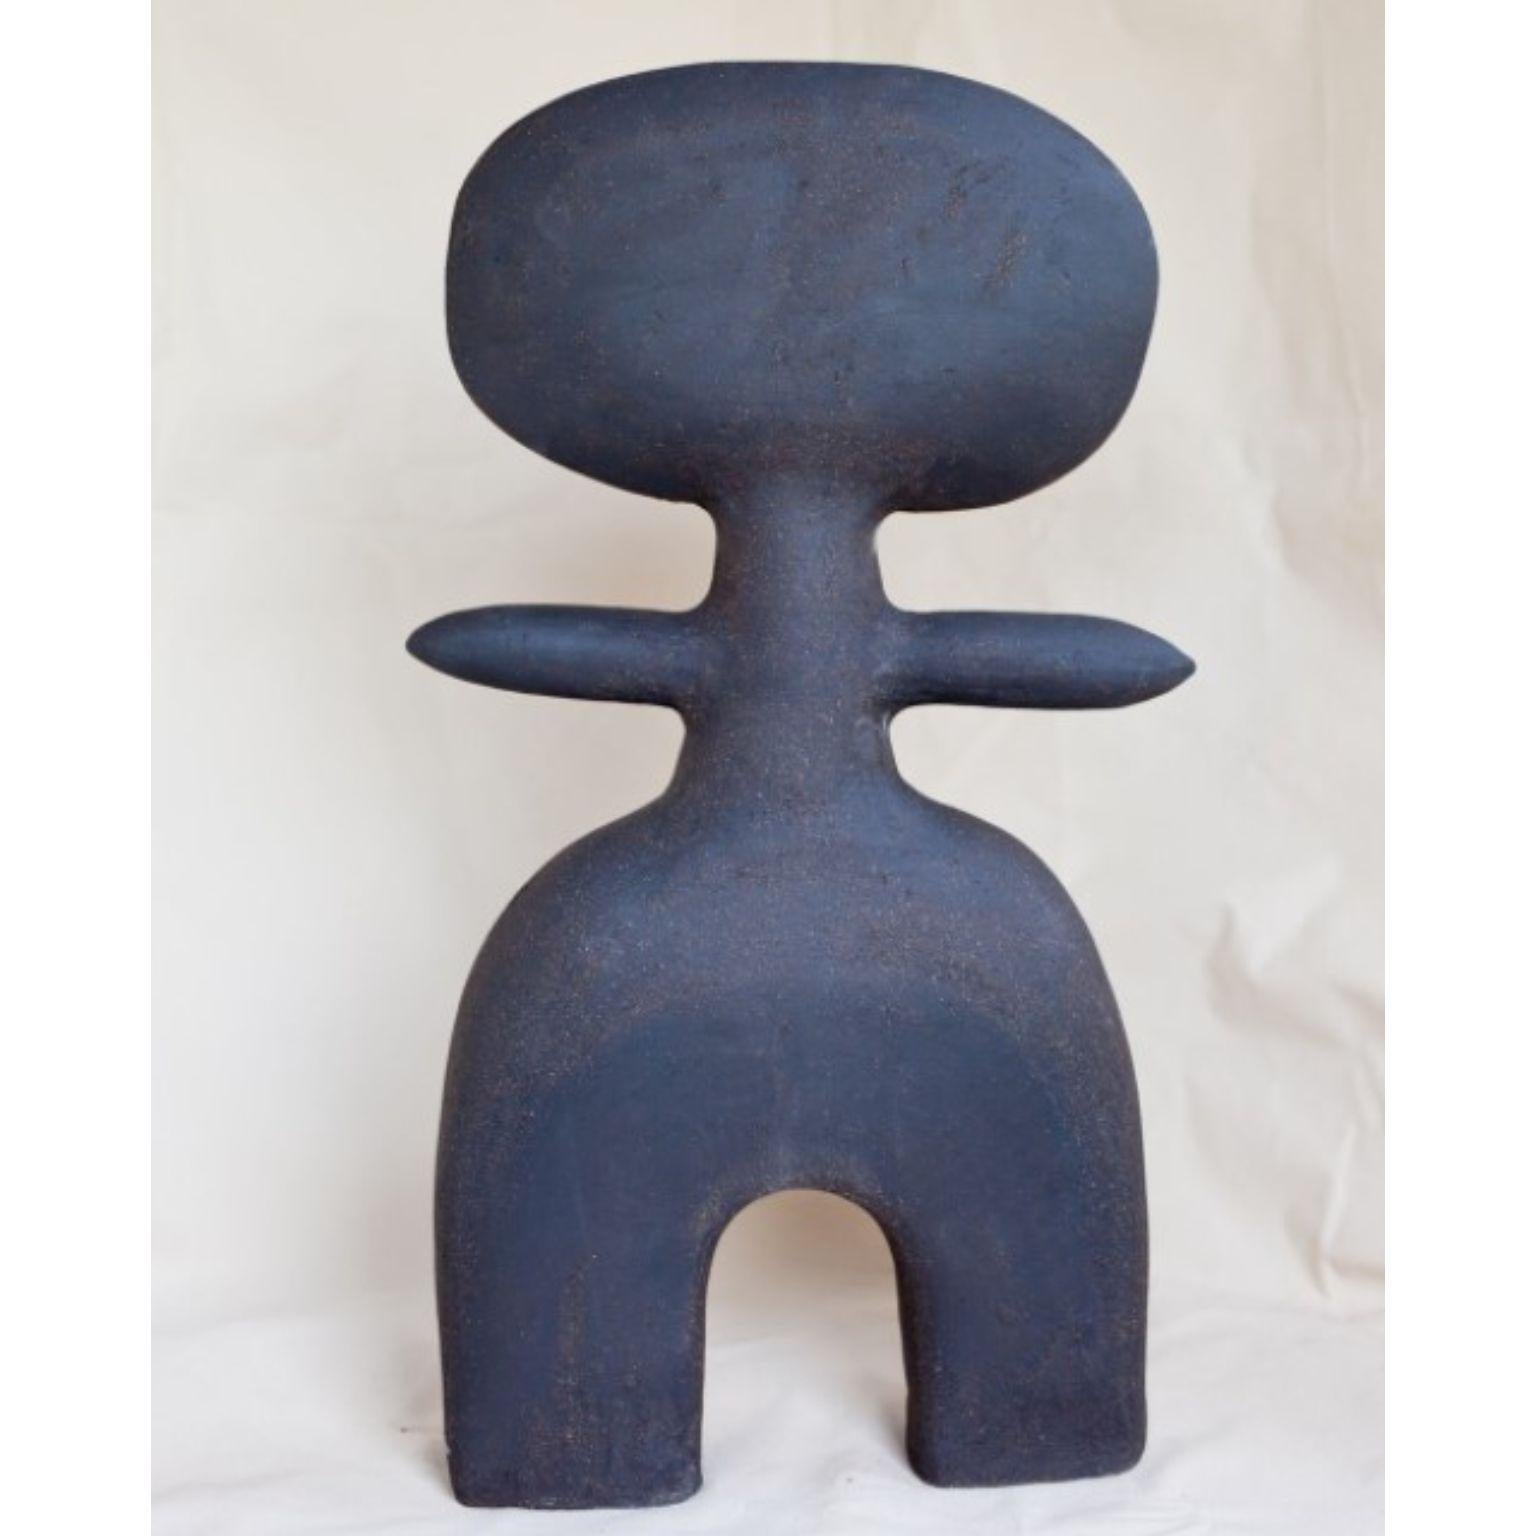 Haniwa Warrior 12 sculpture by Noe Kuremoto
Materials: black stoneware sculpture
Dimensions: D11 x W33 x H59 cm 

My interpretation of ancient clay figurine Haniwa.*
For years I was afraid to become an artist.
Afraid to voice my honest view of the